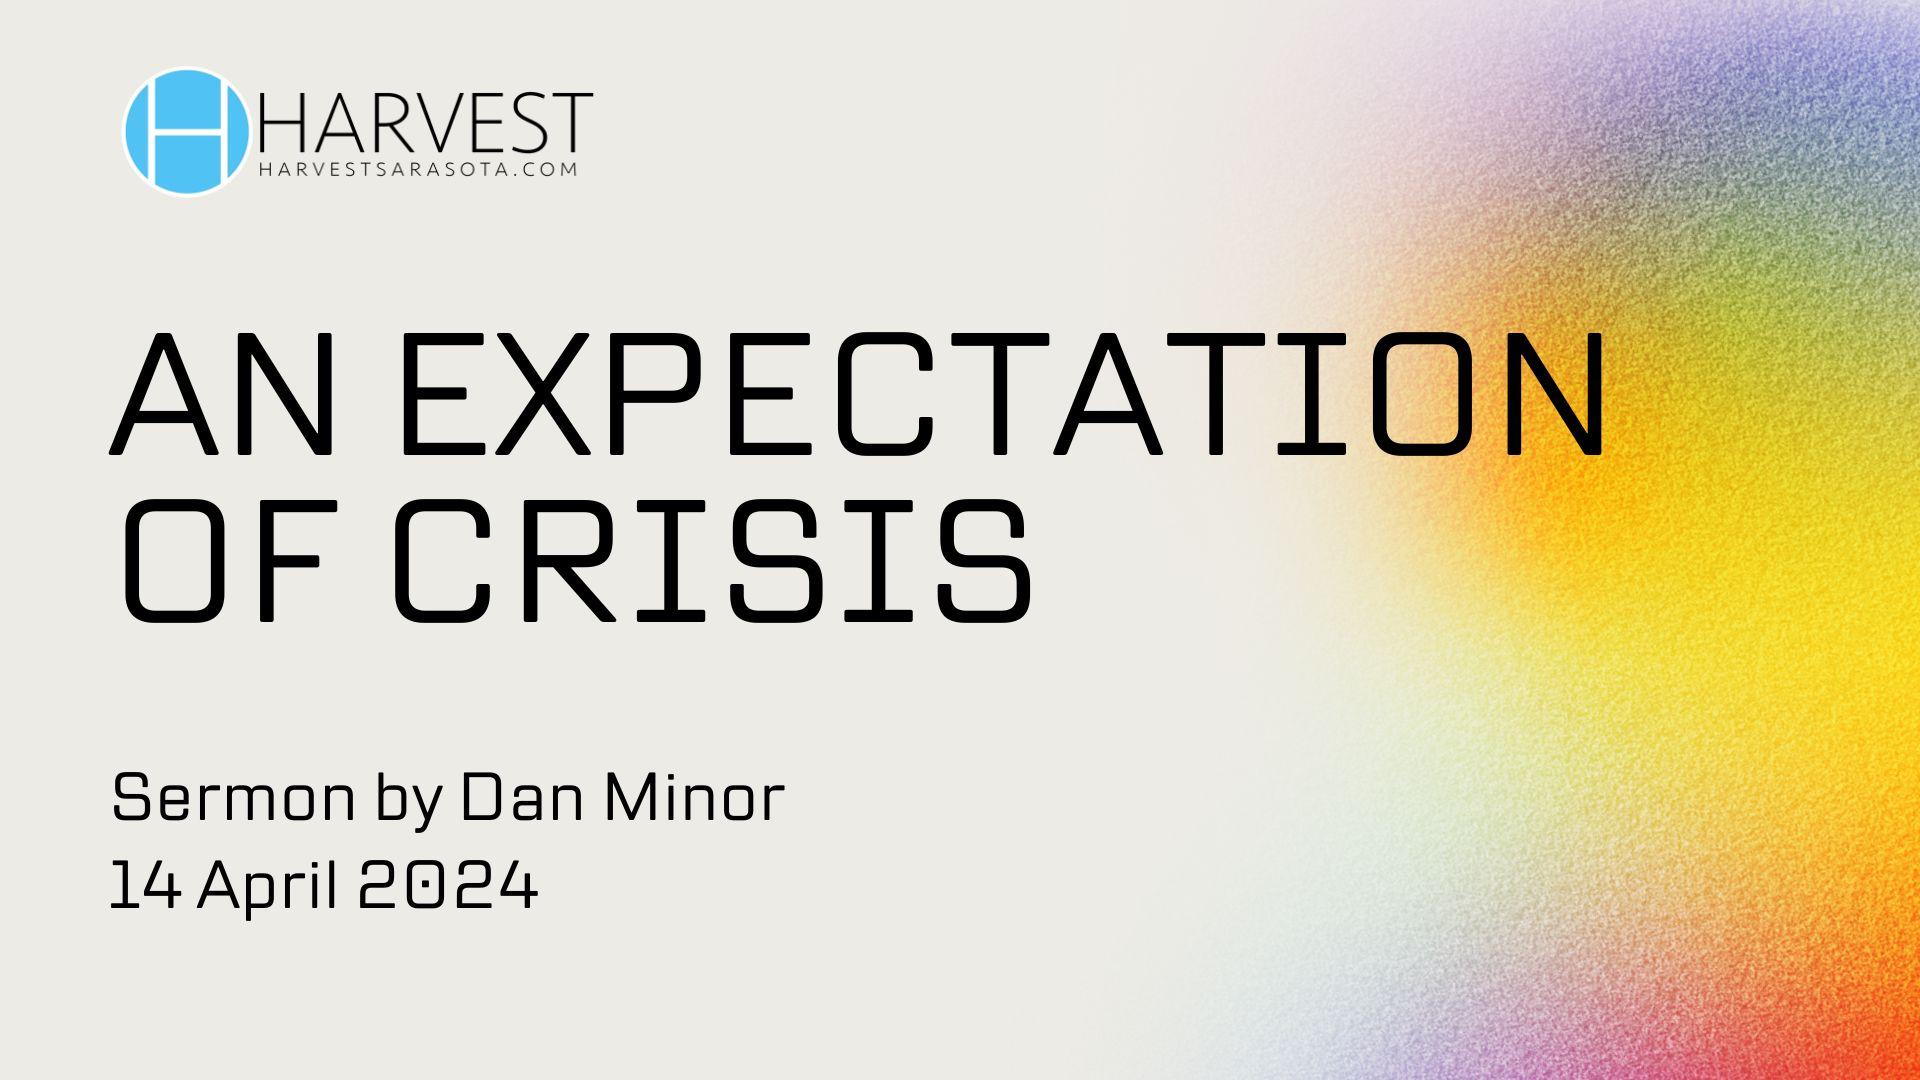 An Expectation of Crisis